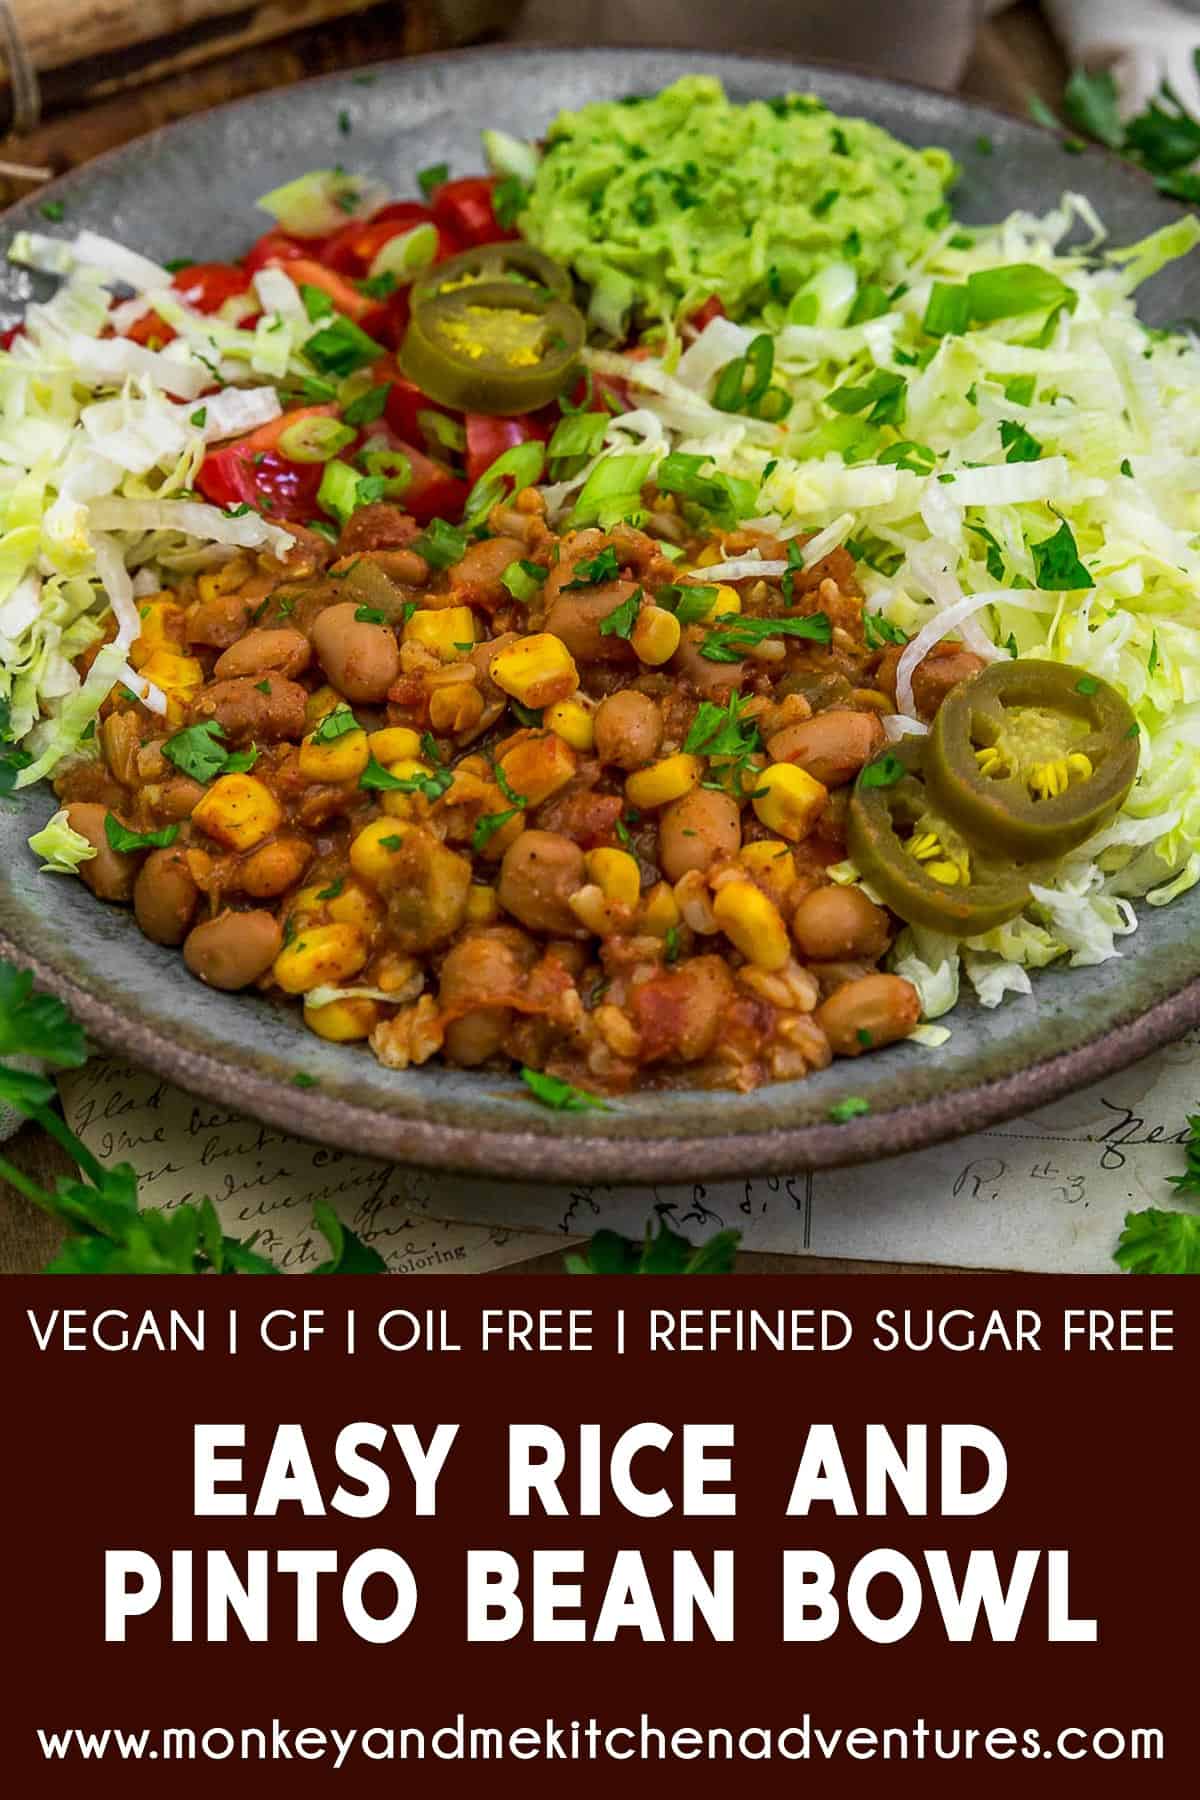 Easy Rice and Pinto Bean Bowl with text description